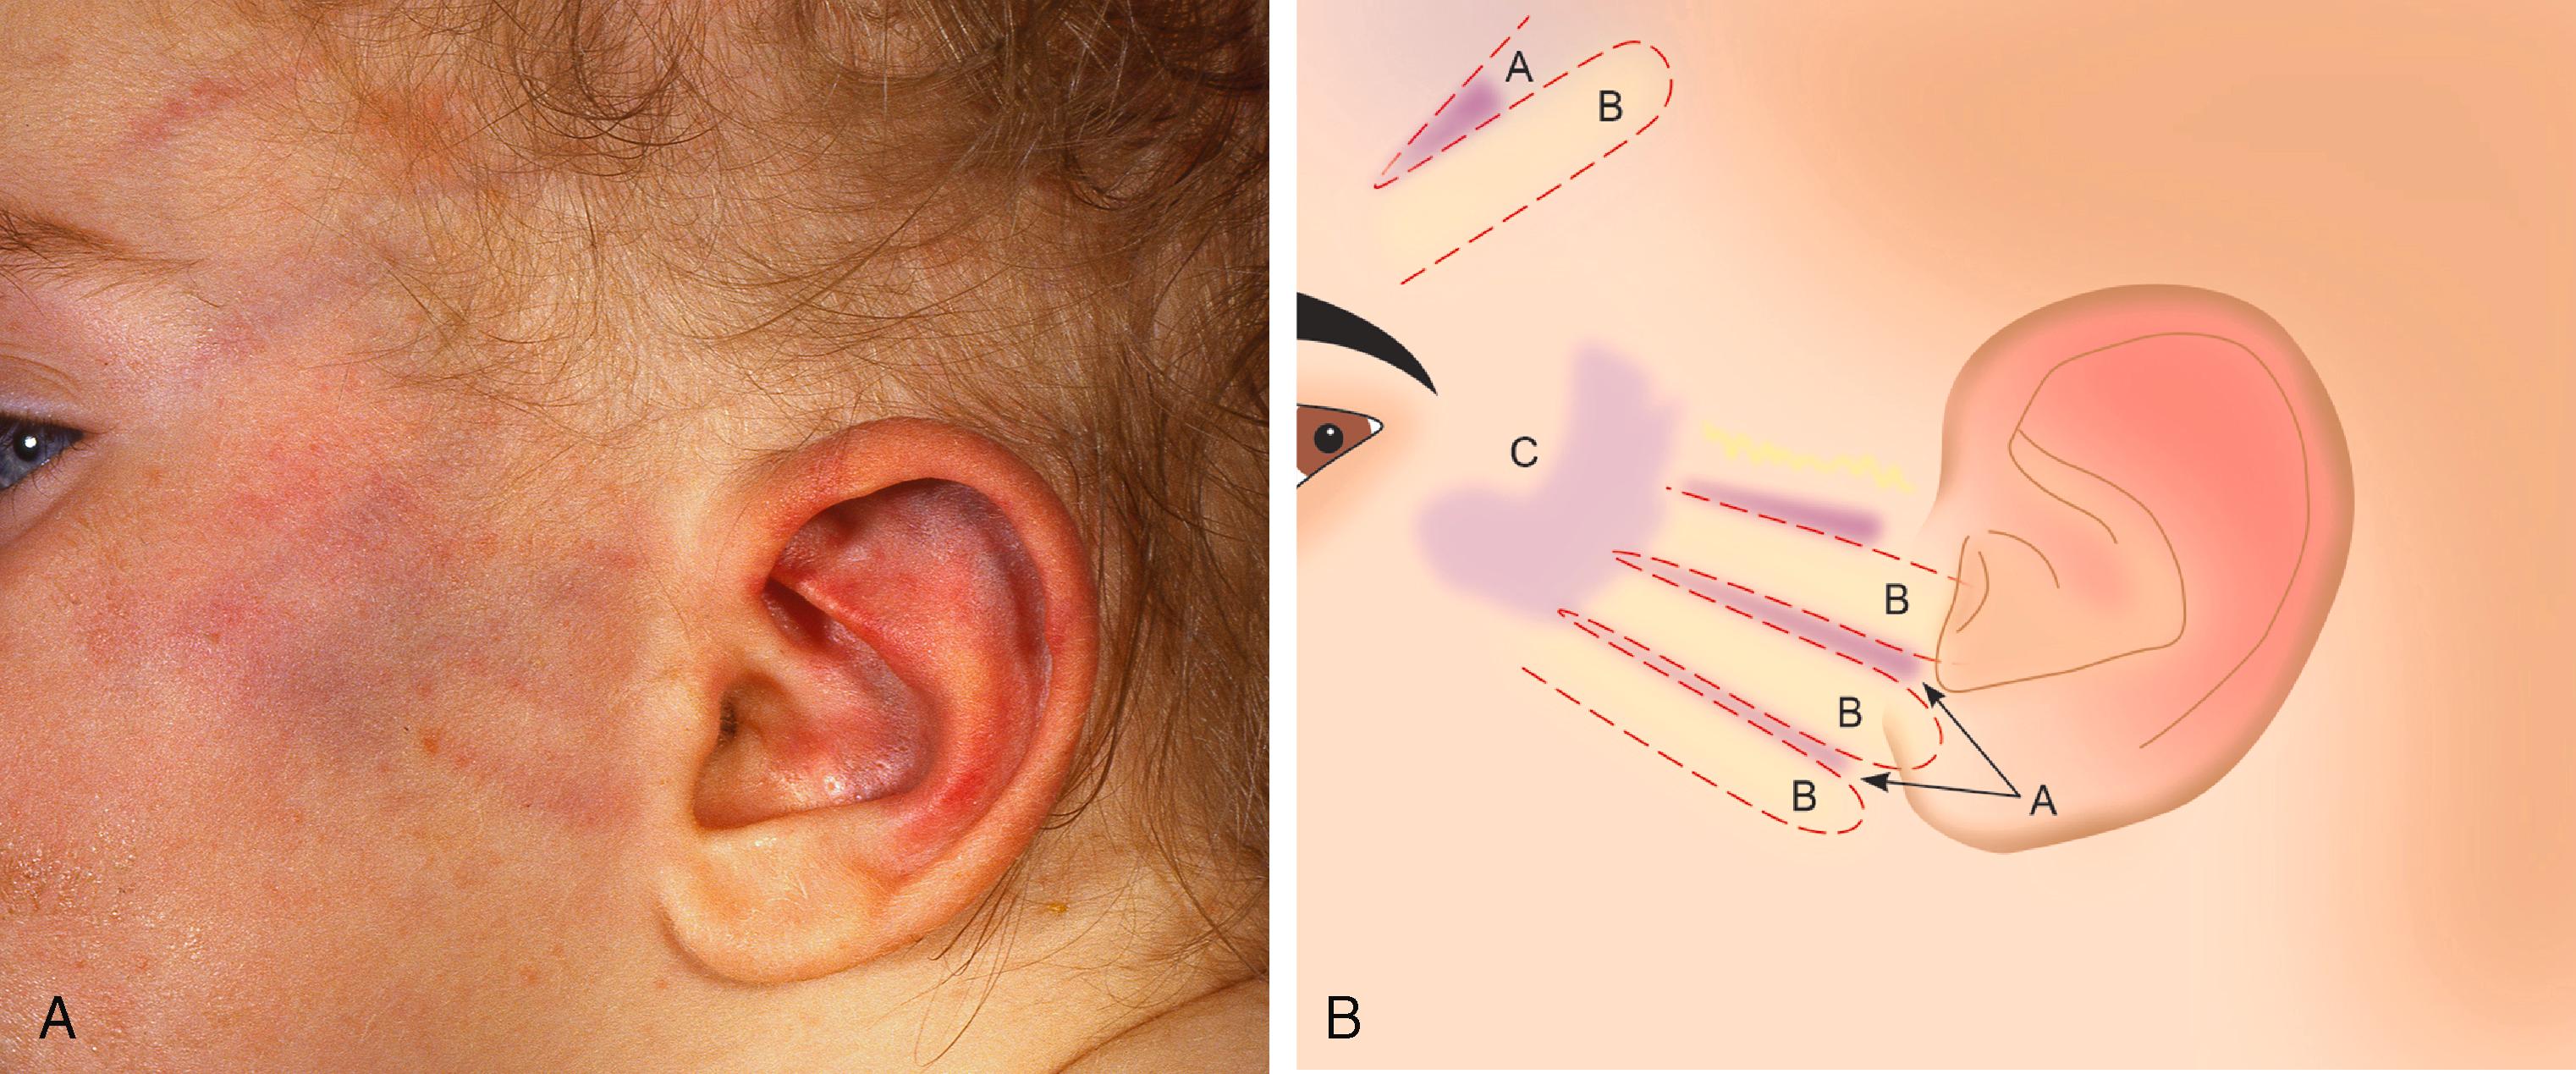 Figure 11.2, A and B. These figures show bruises caused by slap on the face. The ear is bruised. The obvious linear bruises (A) are caused by gap between the fingers allowing capillaries to burst whilst the adjacent paler areas (B) show the impact area of the fingers. The larger bruise (C) is created by the palm of the hand.